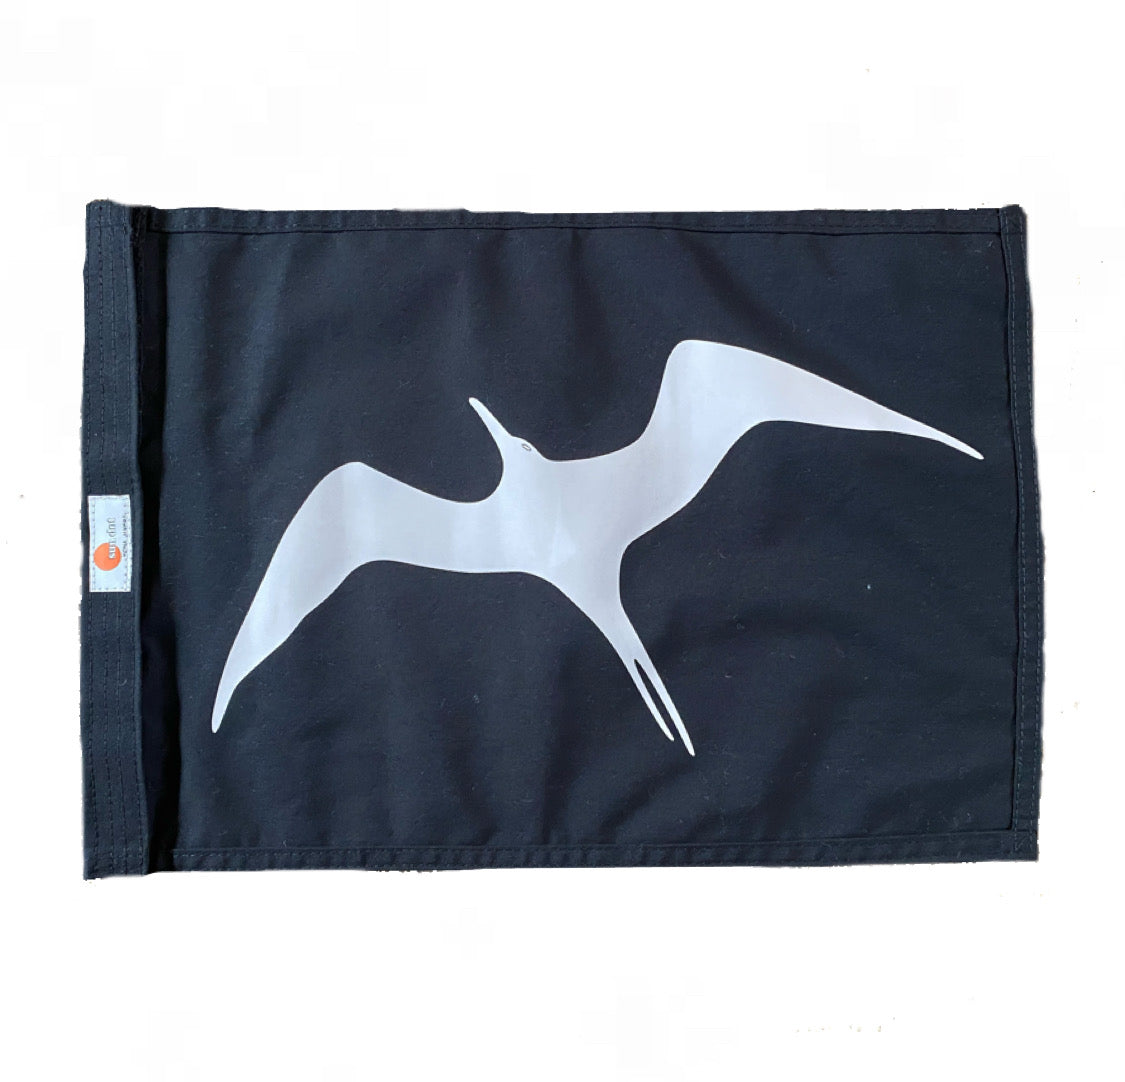 This marine capture flag is black with a white 'iwa bird or great frigate bird screened on both sides of the flag. The flag features velcro attatchment on the left hand side and measures 12x18 inches or 16x24 inches.